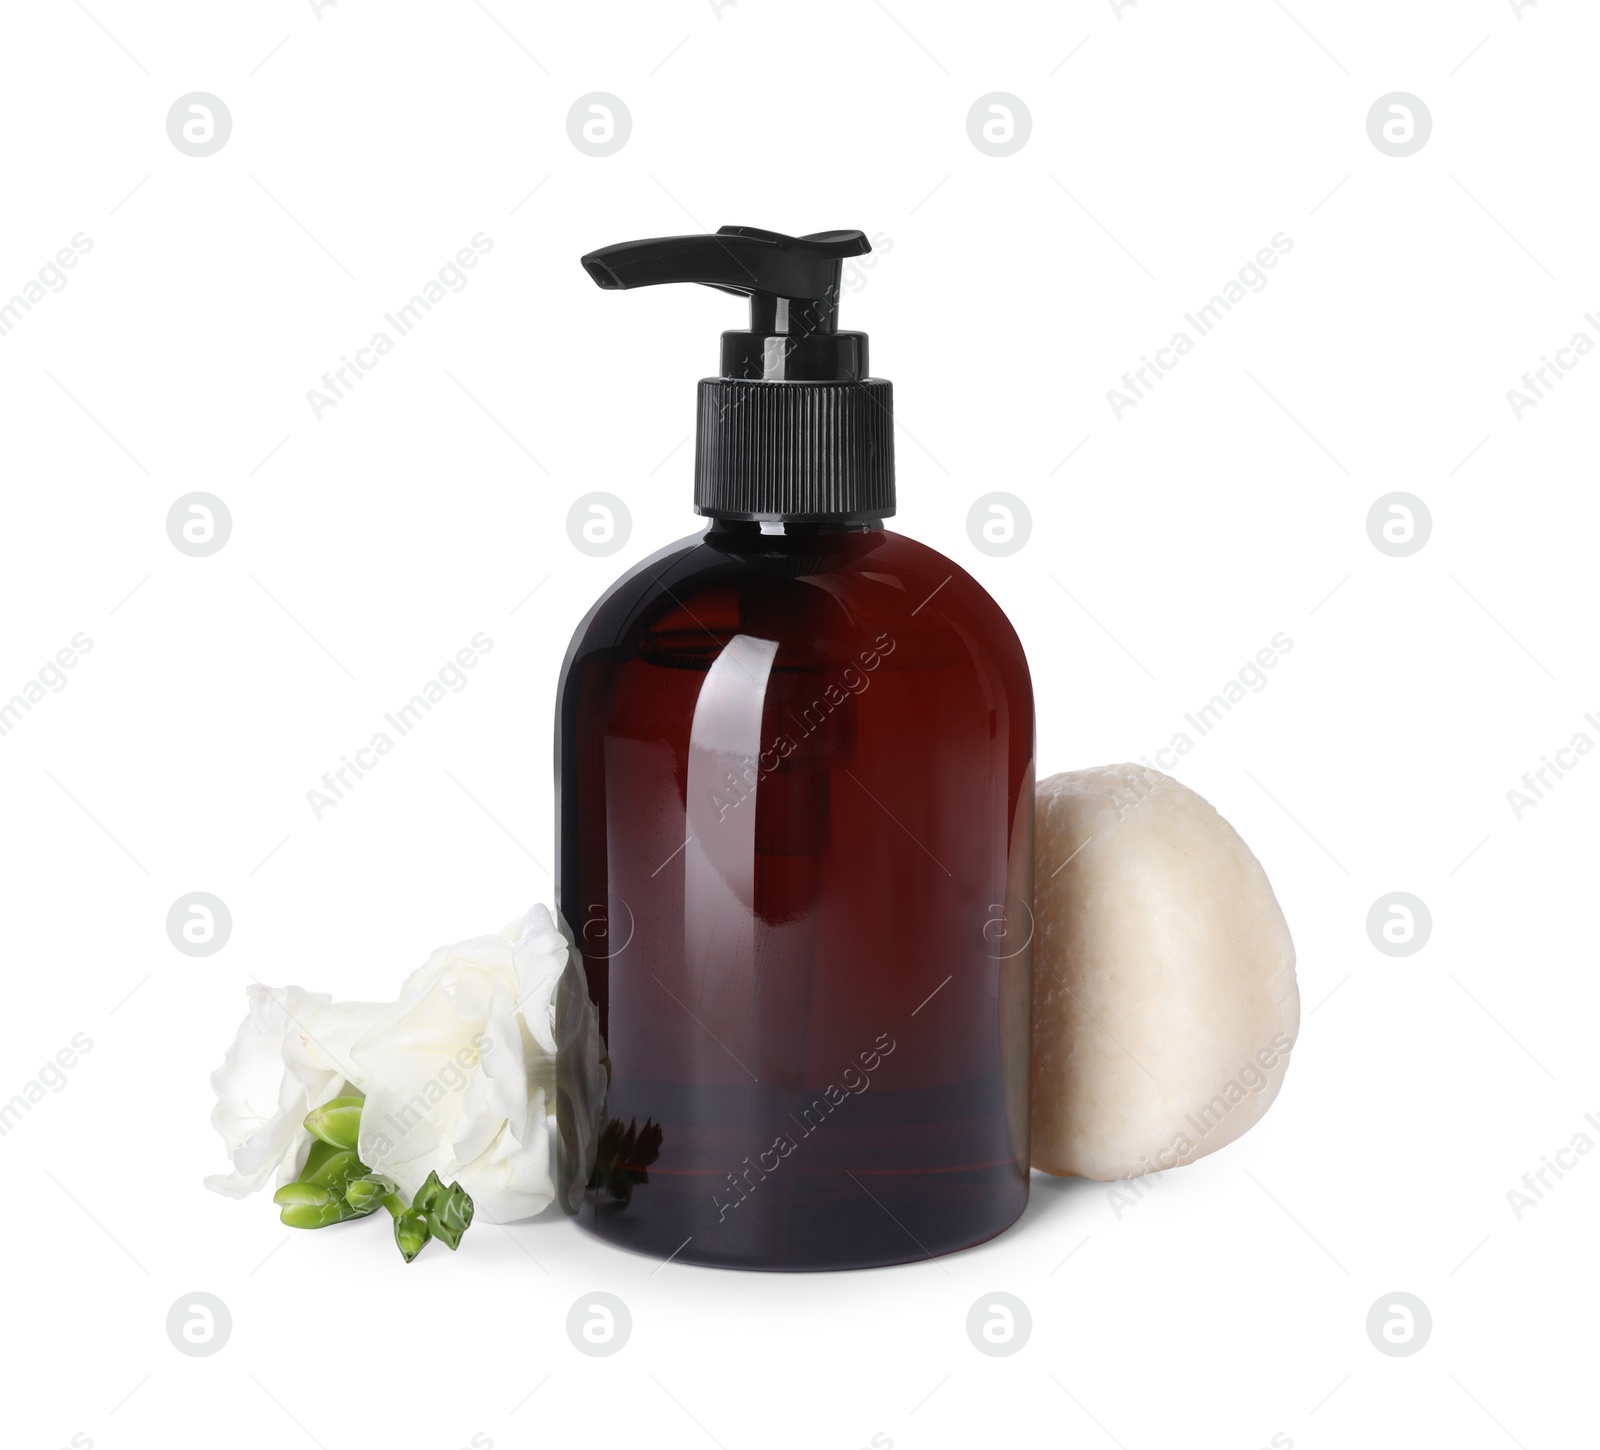 Photo of Solid shampoo bar and bottle of cosmetic product on white background